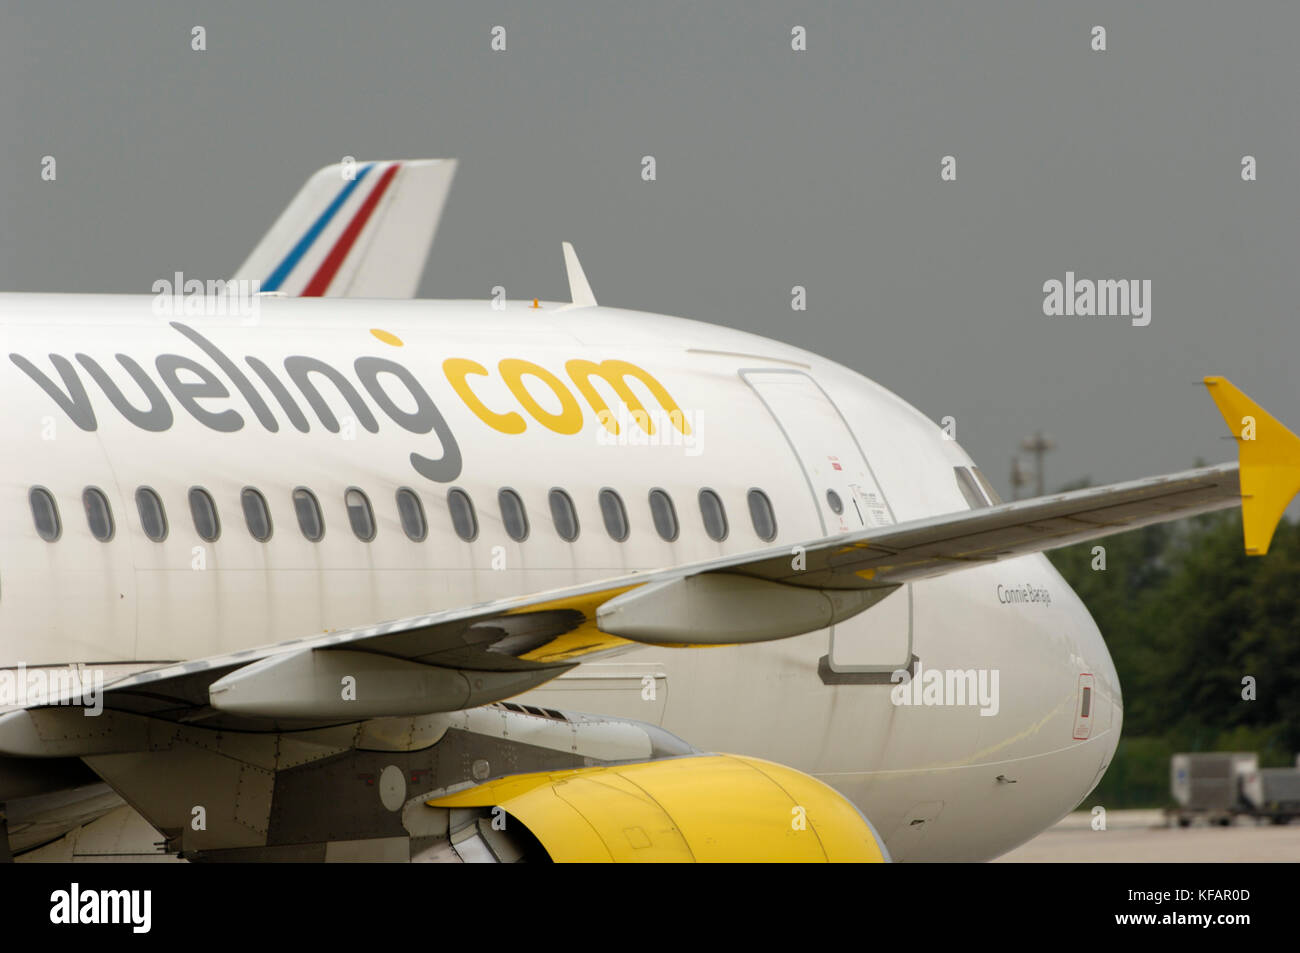 wing and fuselage of a Vueling Airlines, Spain Airbus A320-214 taxiing Stock Photo